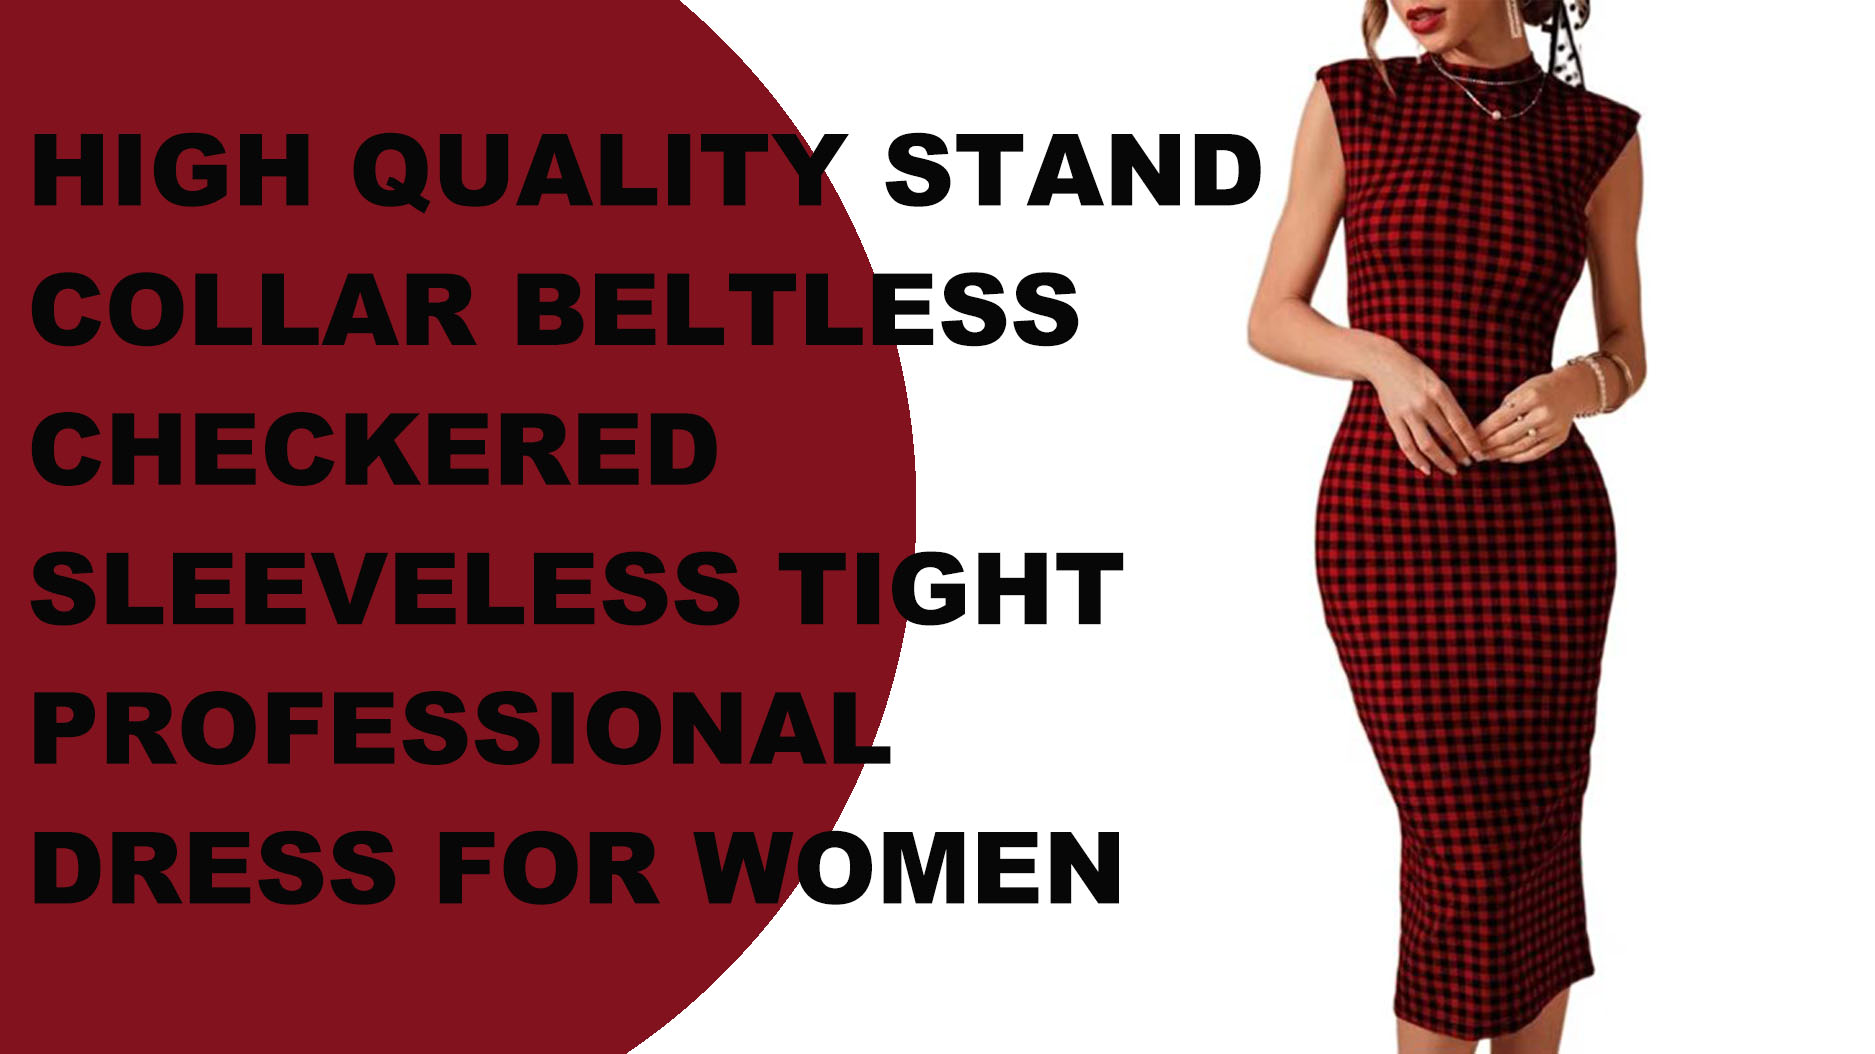 High quality stand collar beltless checkered dress for women